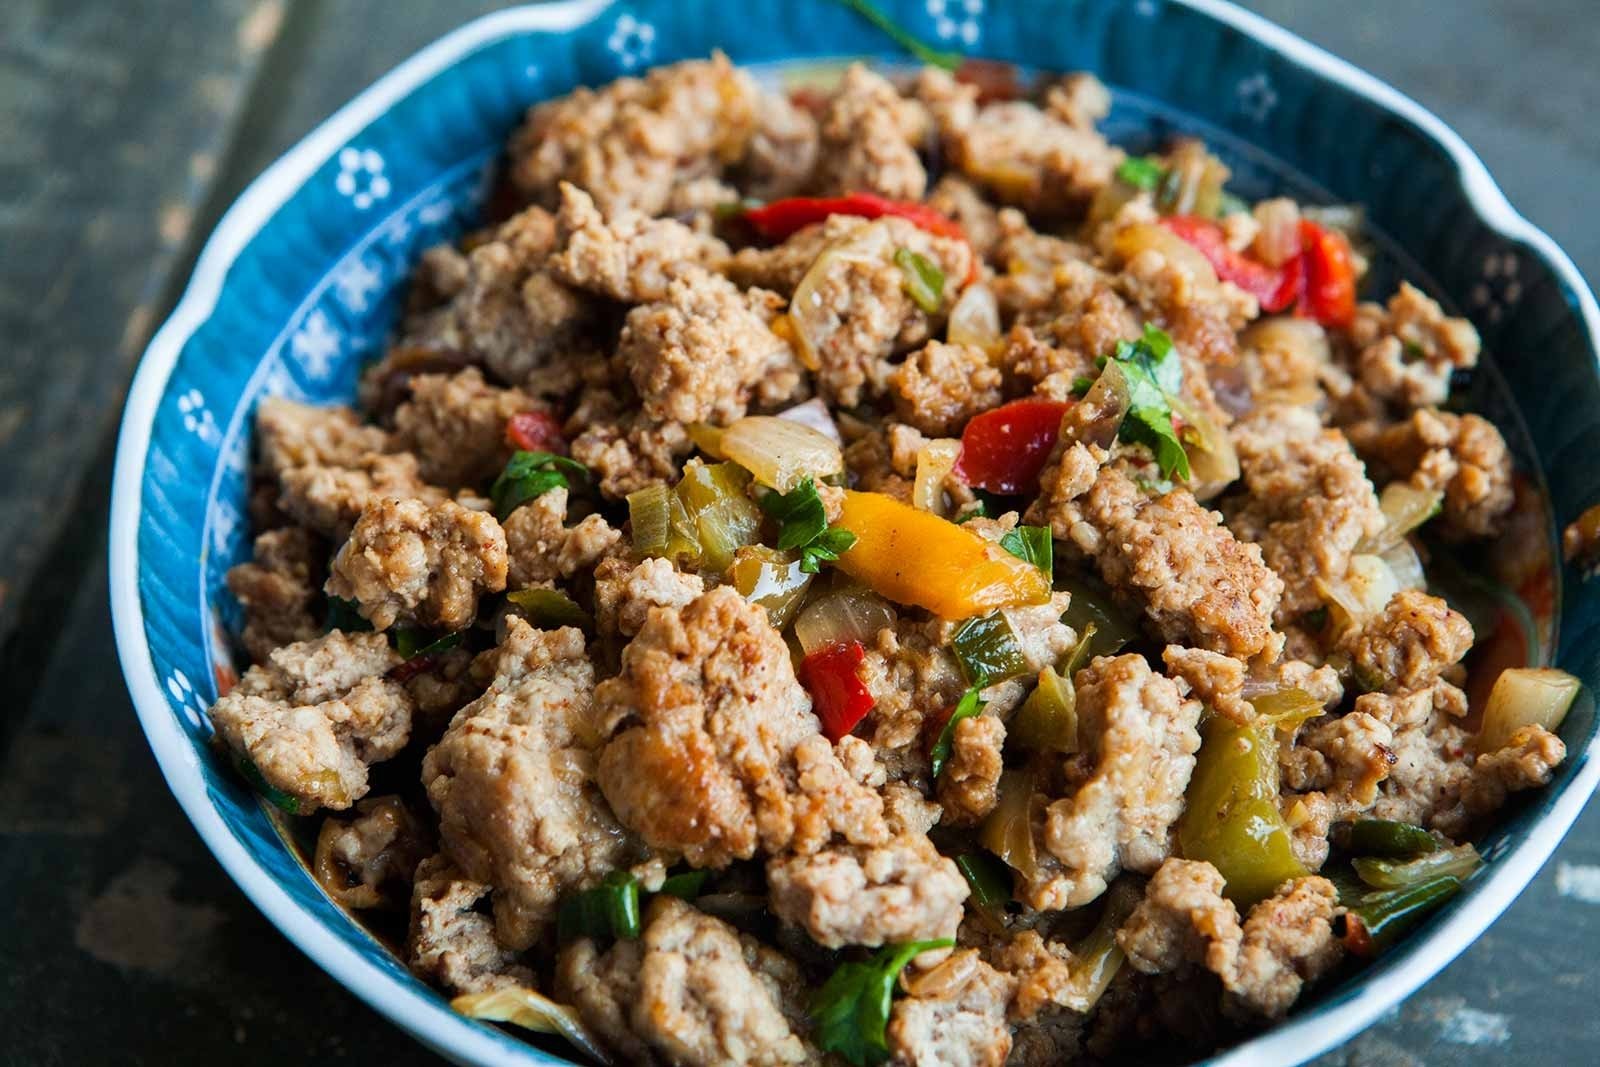 10 Lovely Dinner Ideas With Ground Turkey moms ground turkey and peppers recipe simplyrecipes 4 2023